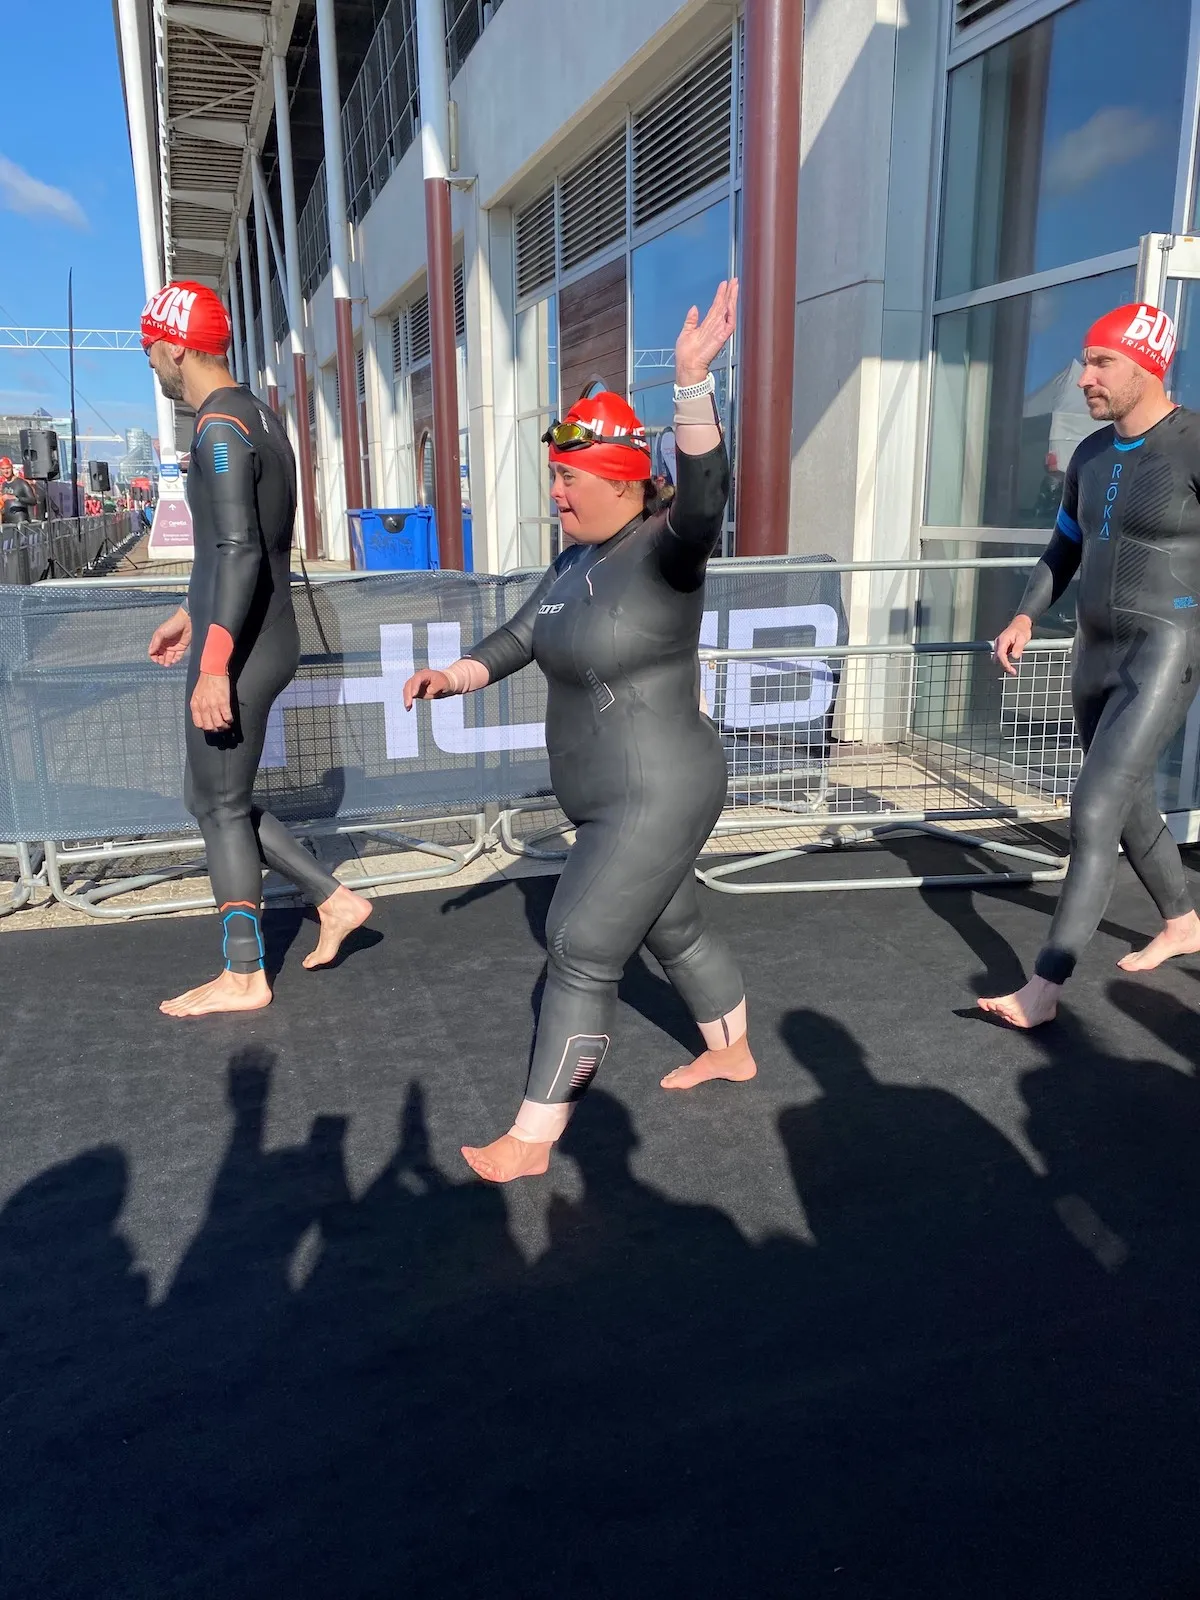 Jade Kingdom on her way to the start line of Challenge London 2023